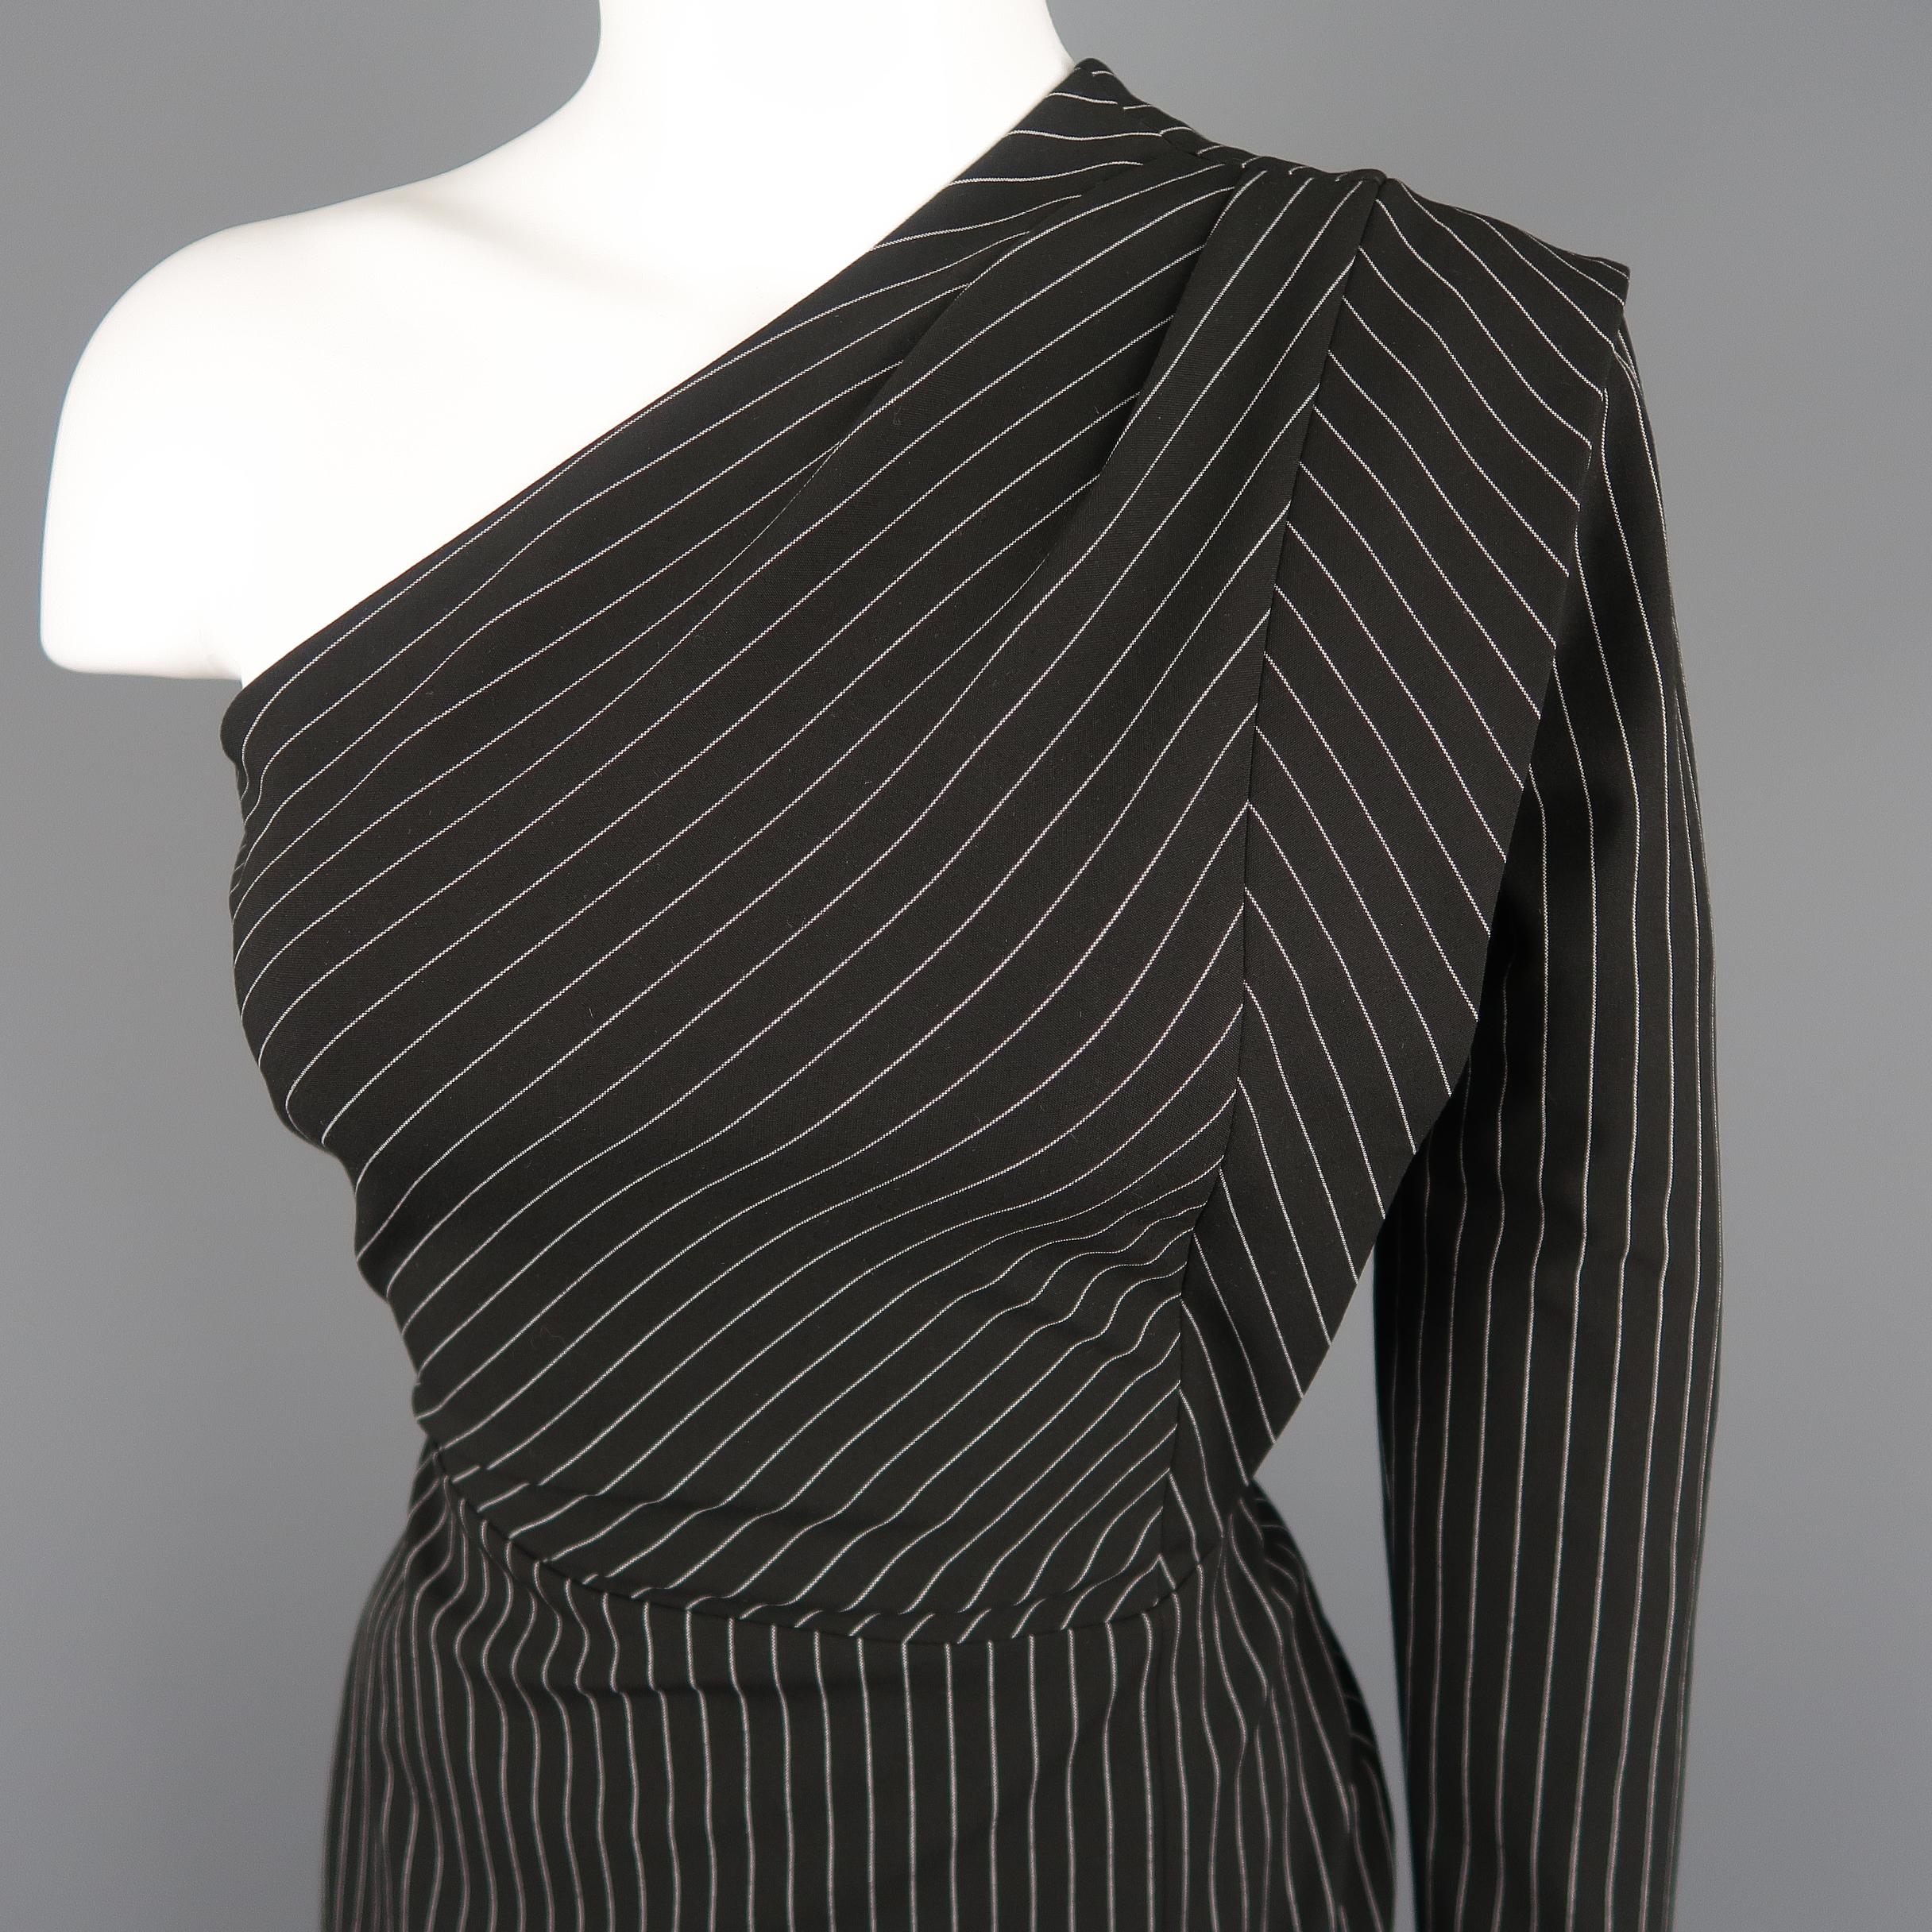 MICHELLE MASON dress comes in pinstripe fabric with sone shoulder neckline, pleated shoulder, single sleeve with overlay,and mini skirt with asymmetrical hem. Made in USA.
 
New with Tags.
Marked: 0
 
Measurements:
 
Bust: 34 in.
Waist: 24 in.
Hip: